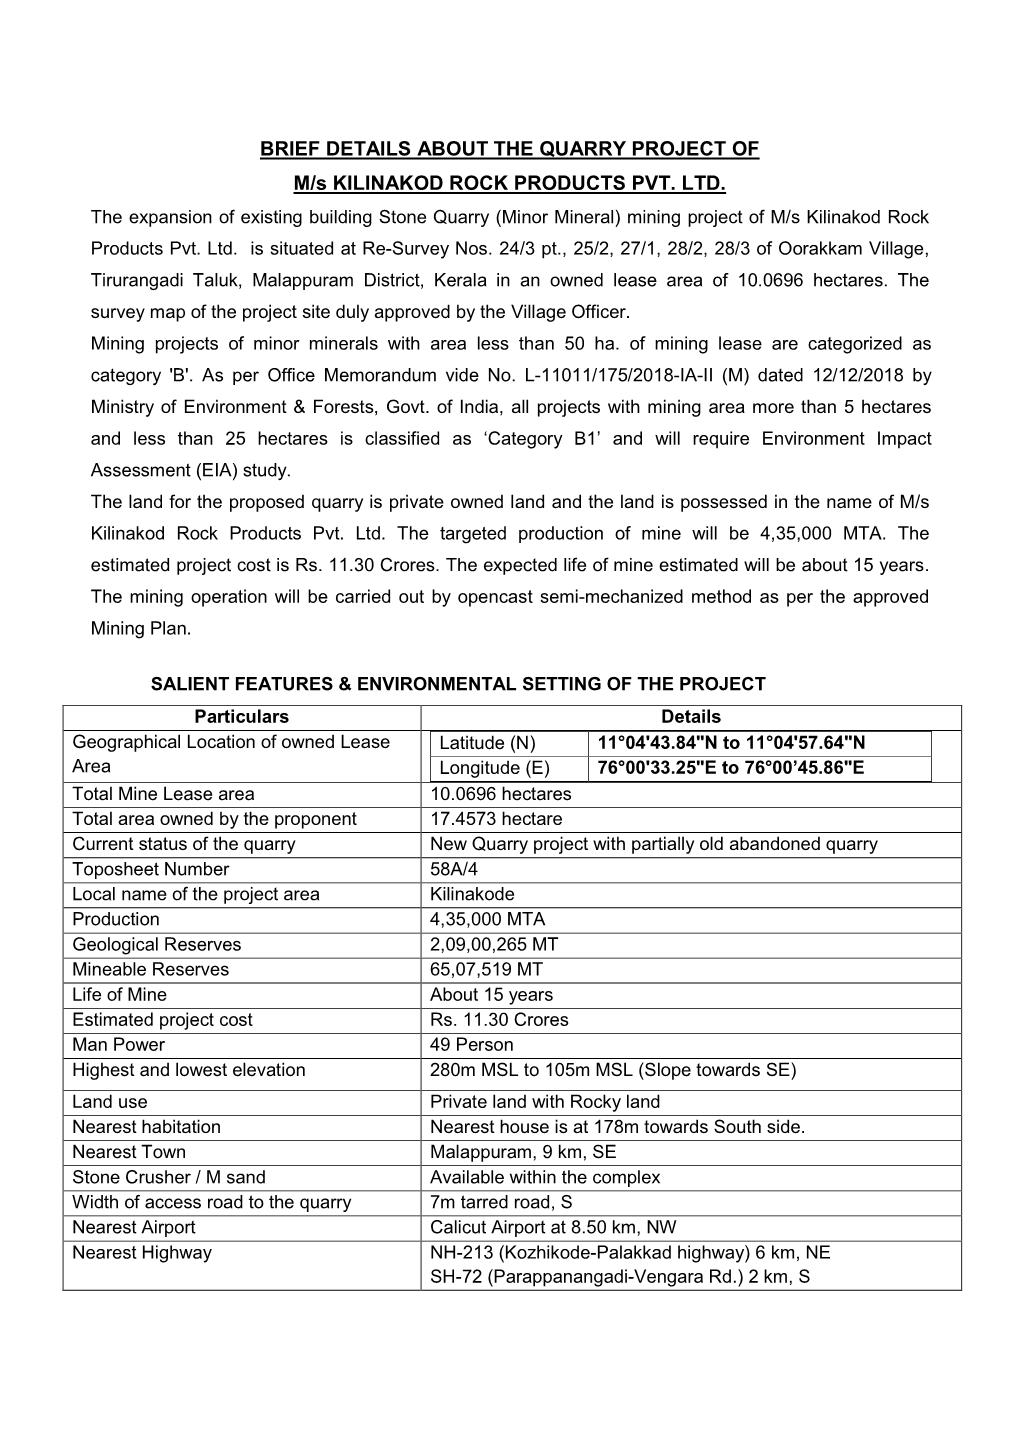 BRIEF DETAILS ABOUT the QUARRY PROJECT of M/S KILINAKOD ROCK PRODUCTS PVT